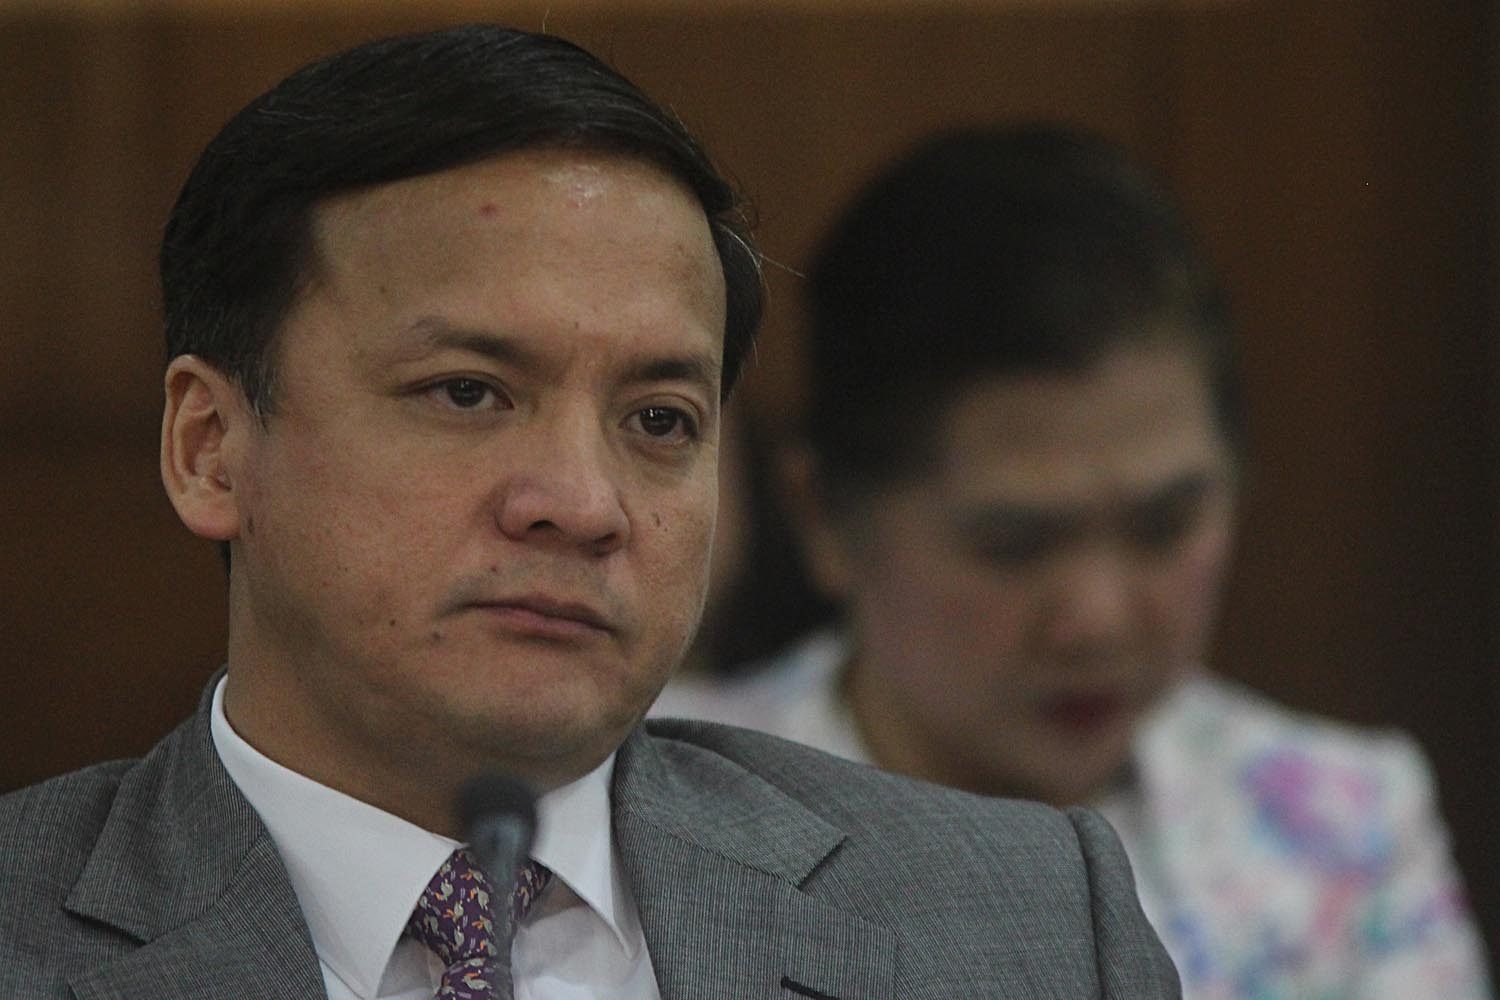 Complainant opposes Midas Marquez’ SC application, cites ‘misused’ World Bank funds